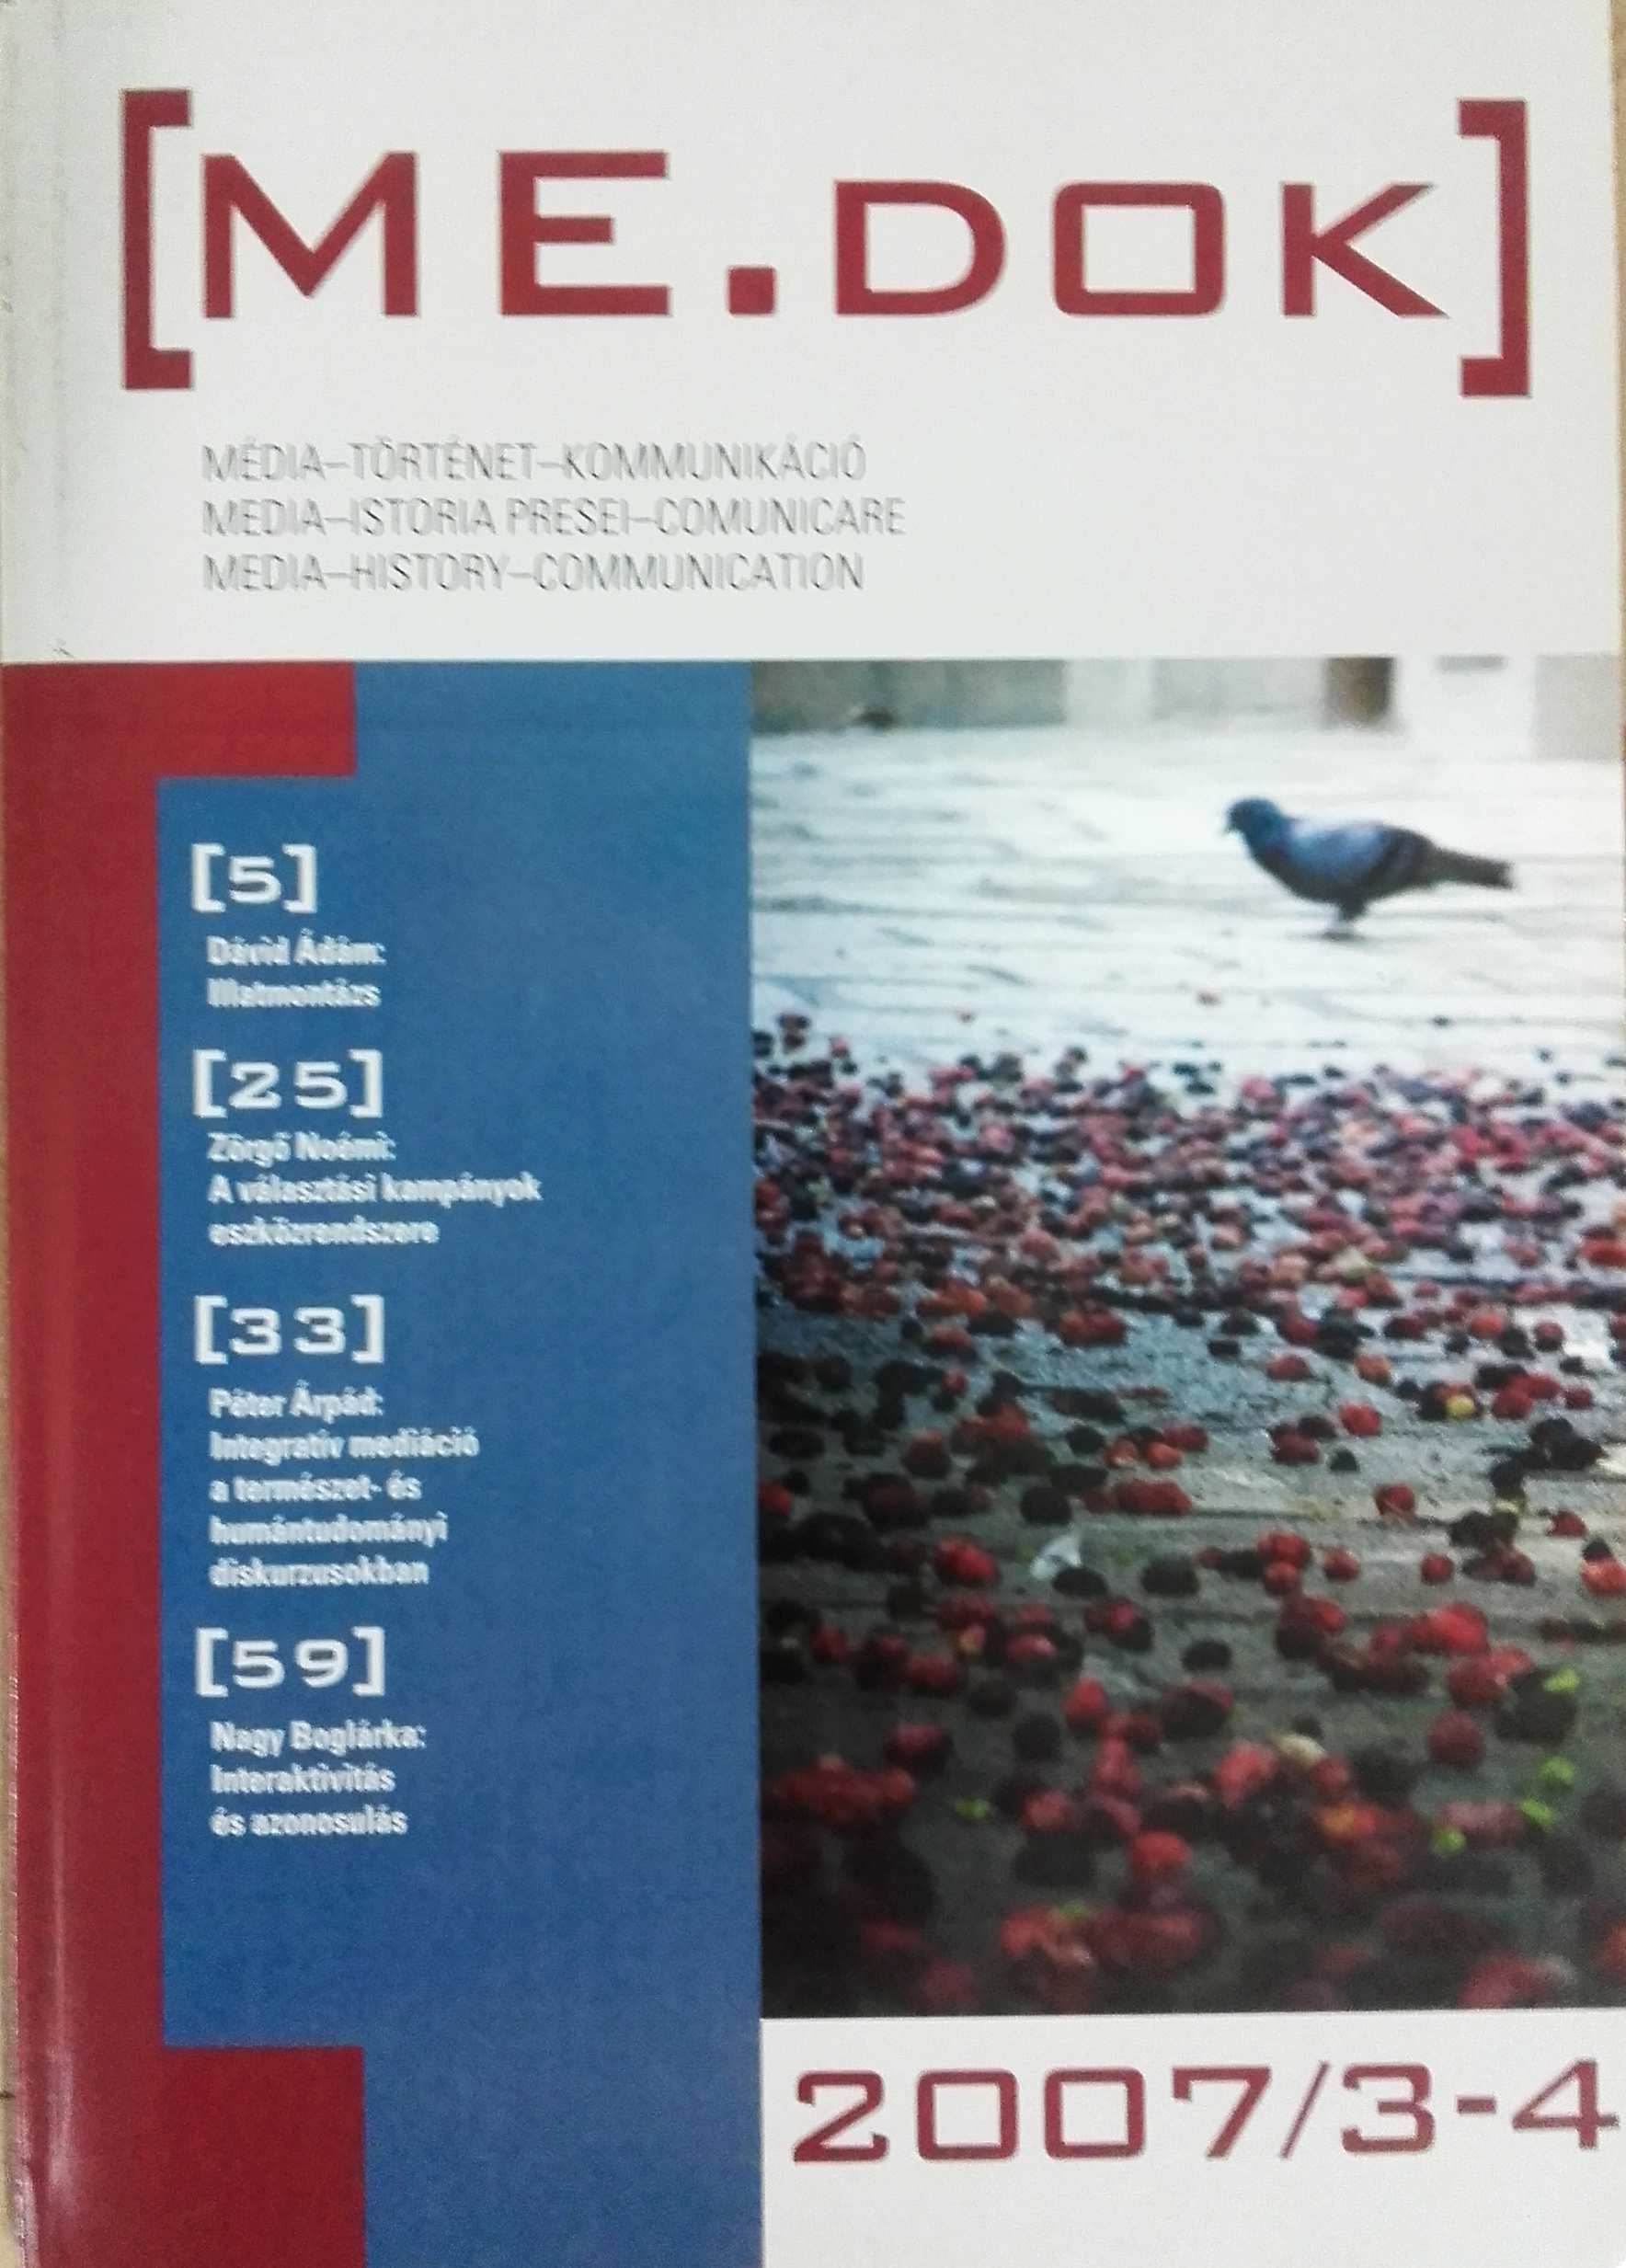 Jornal of press and commnuication theory on the romanian press market Cover Image